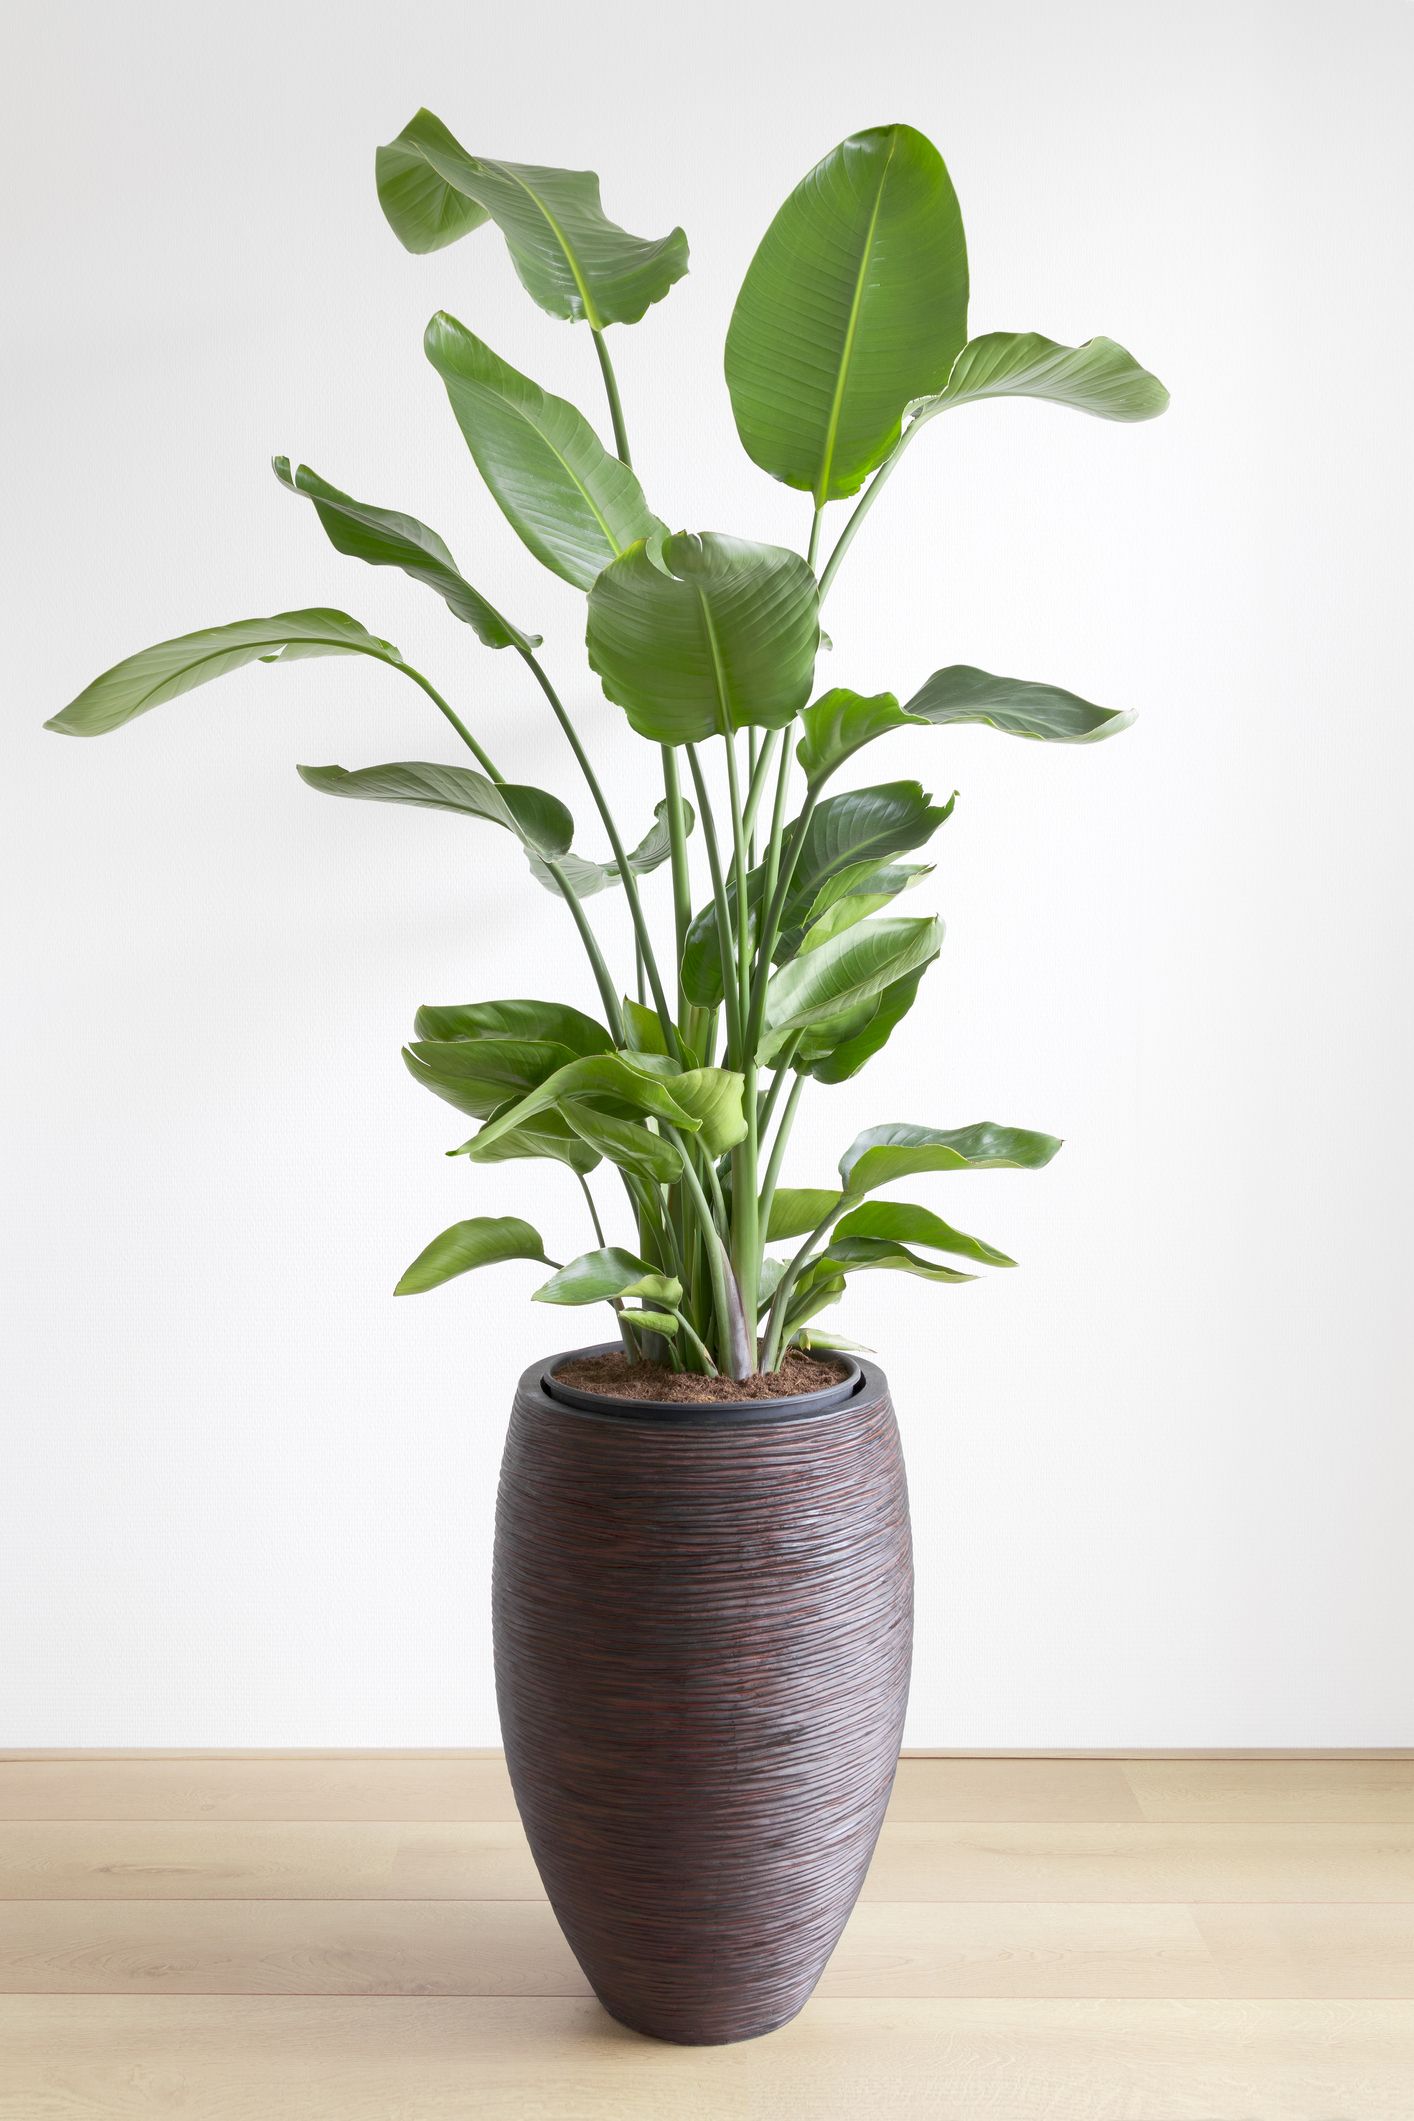 15 oversized house plants - best tall house plants to buy online